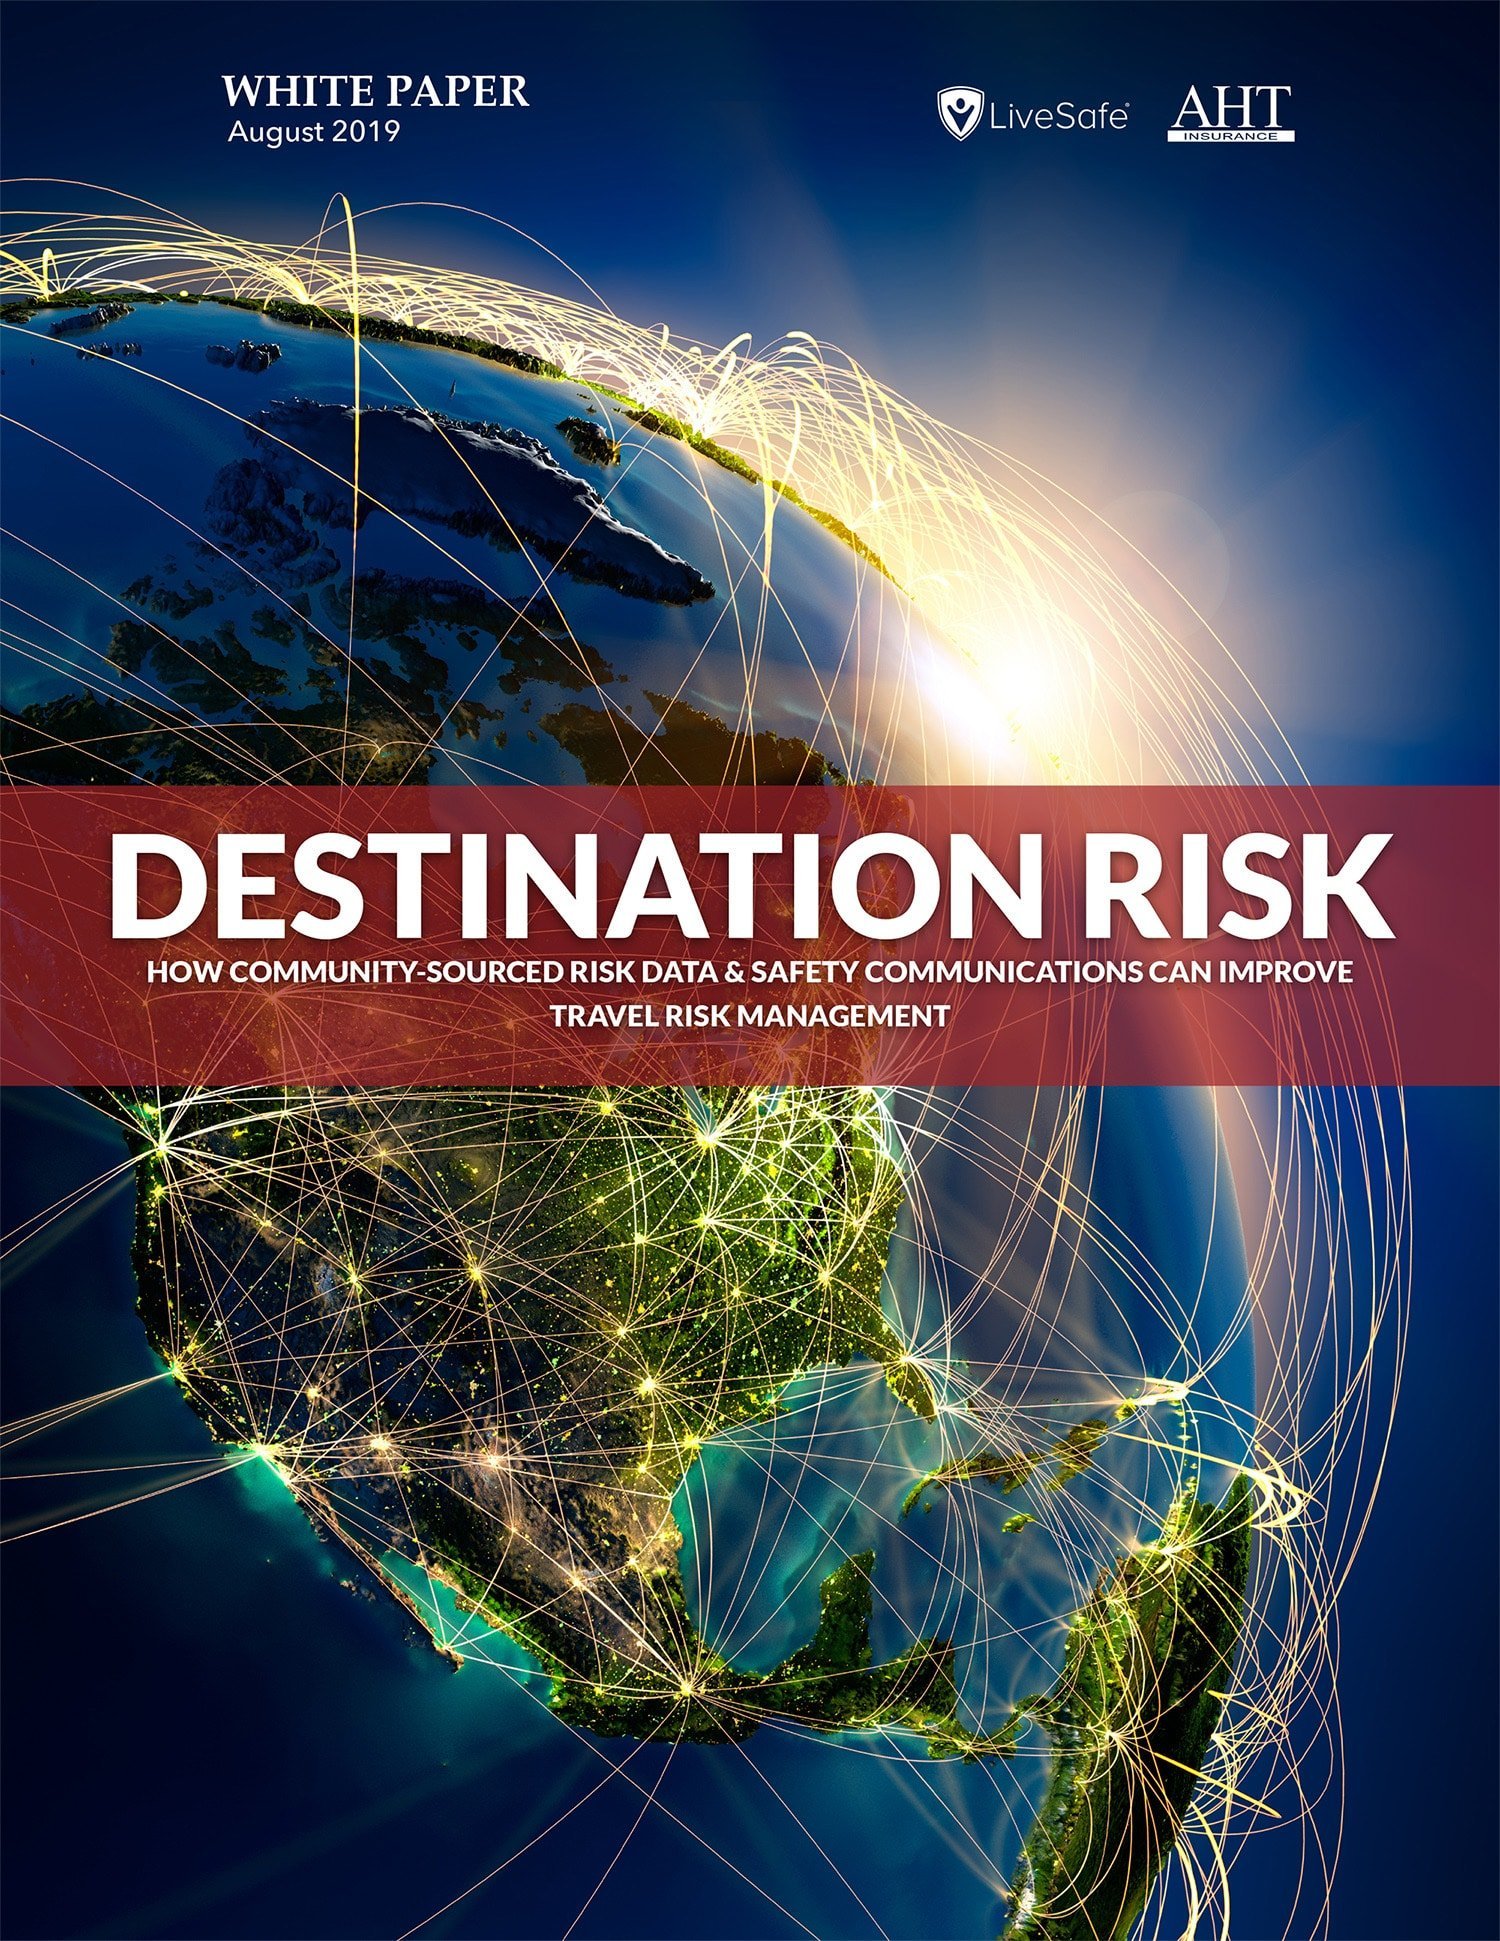 LiveSafe Releases New White Paper on How Technology Can Improve Travel Risk Management